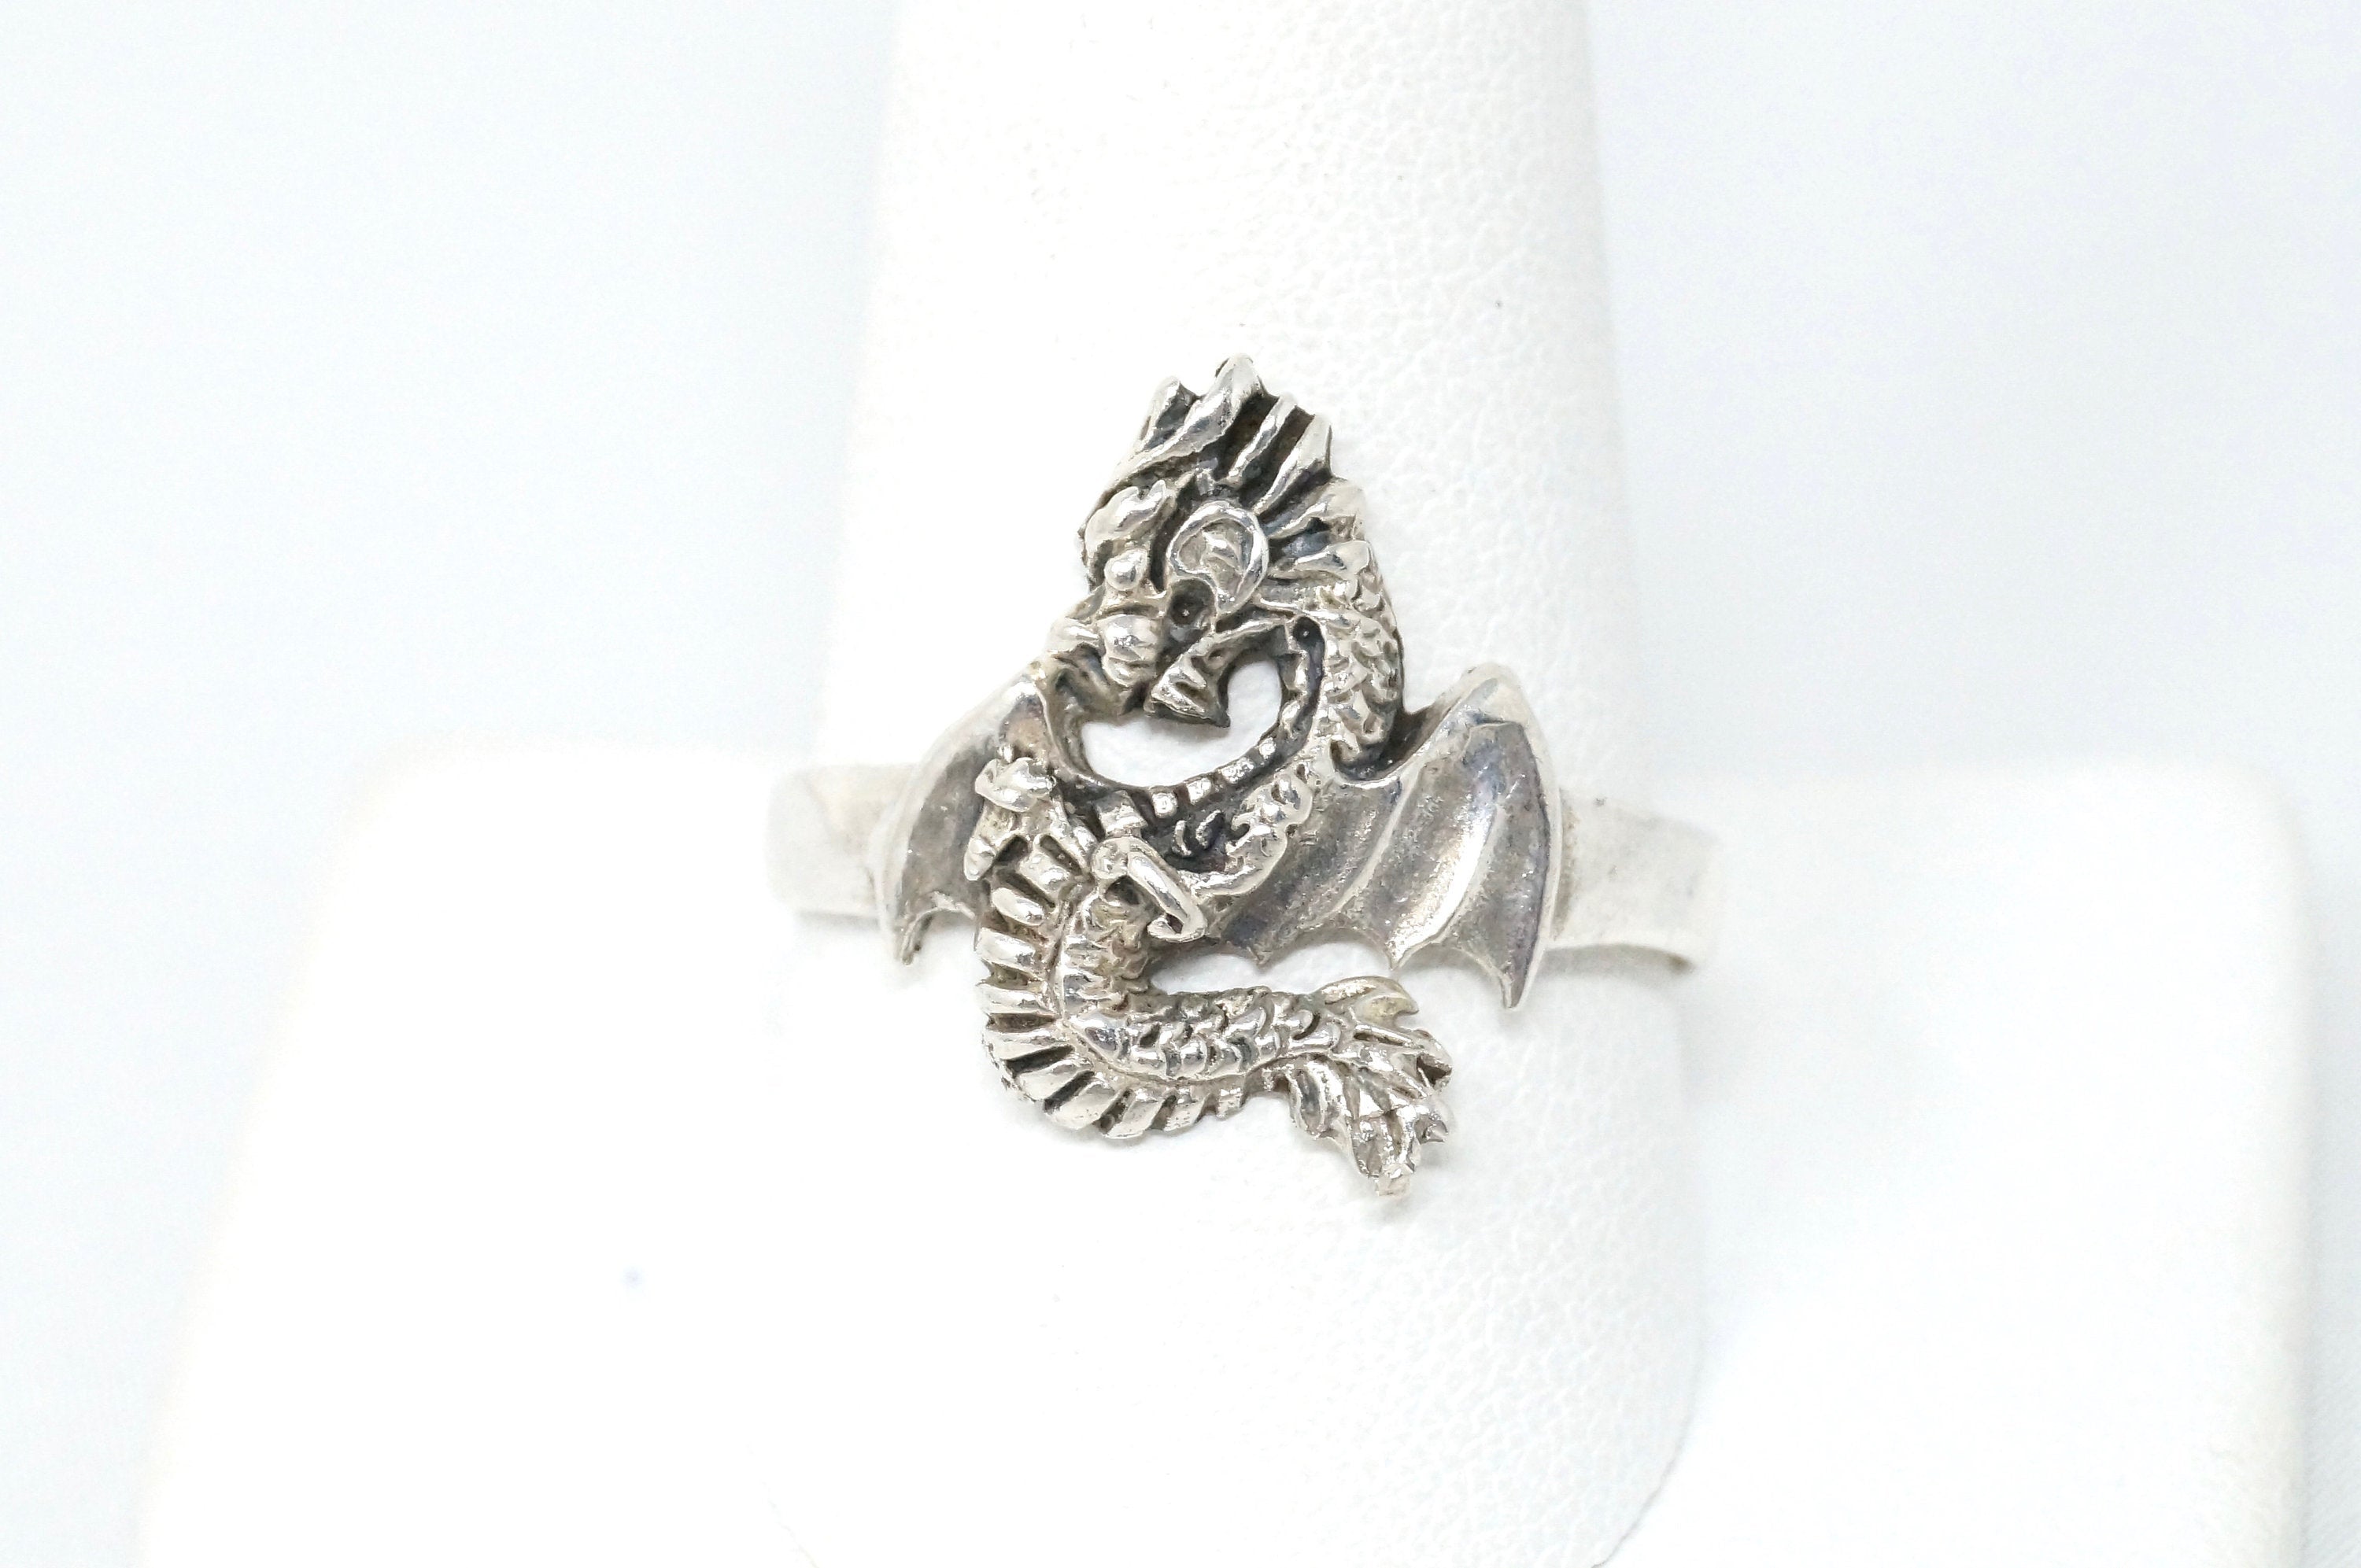 Amazing Vintage Flying Magical Dragon Sterling Silver Ring - Size 11